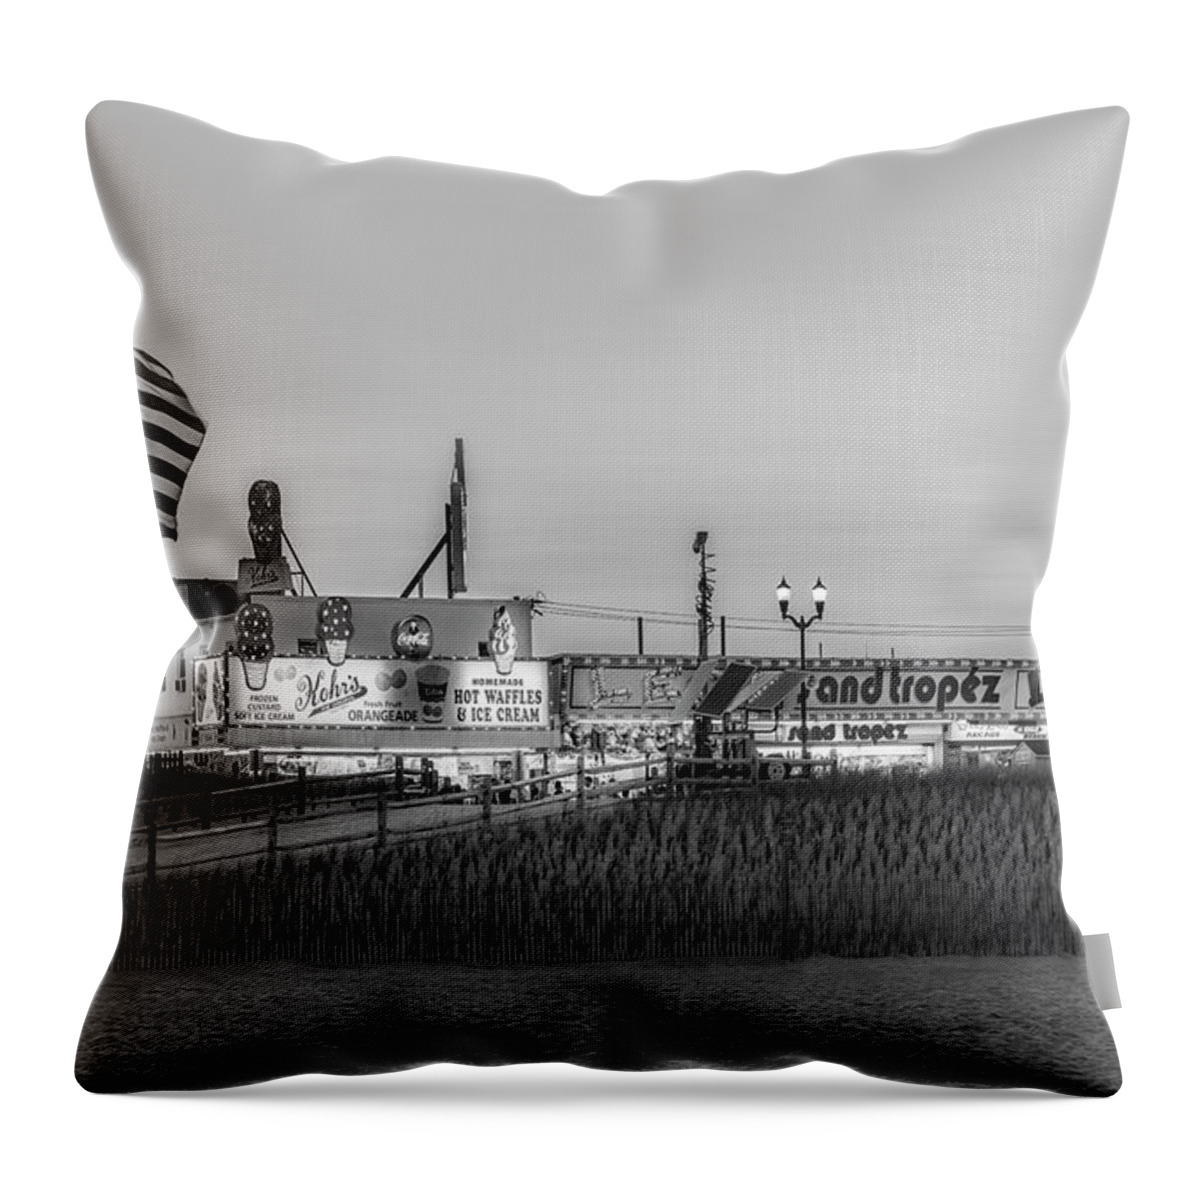 Casino Pier Throw Pillow featuring the photograph Seaside Heights Boardwalk BW by Susan Candelario